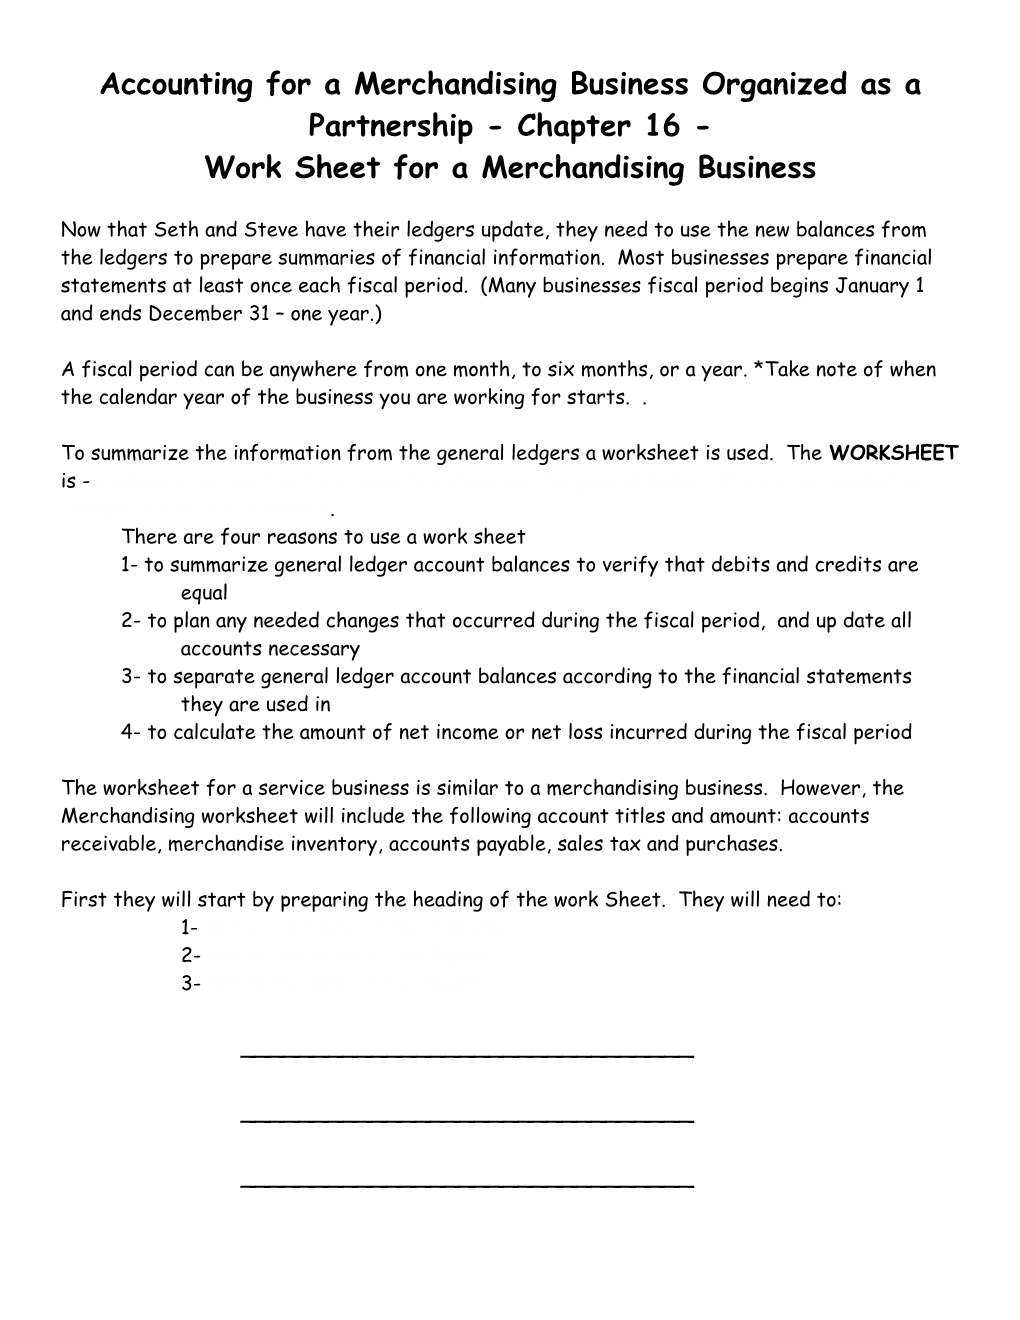 Accounting for a Merchandising Business Organized As a Partnership